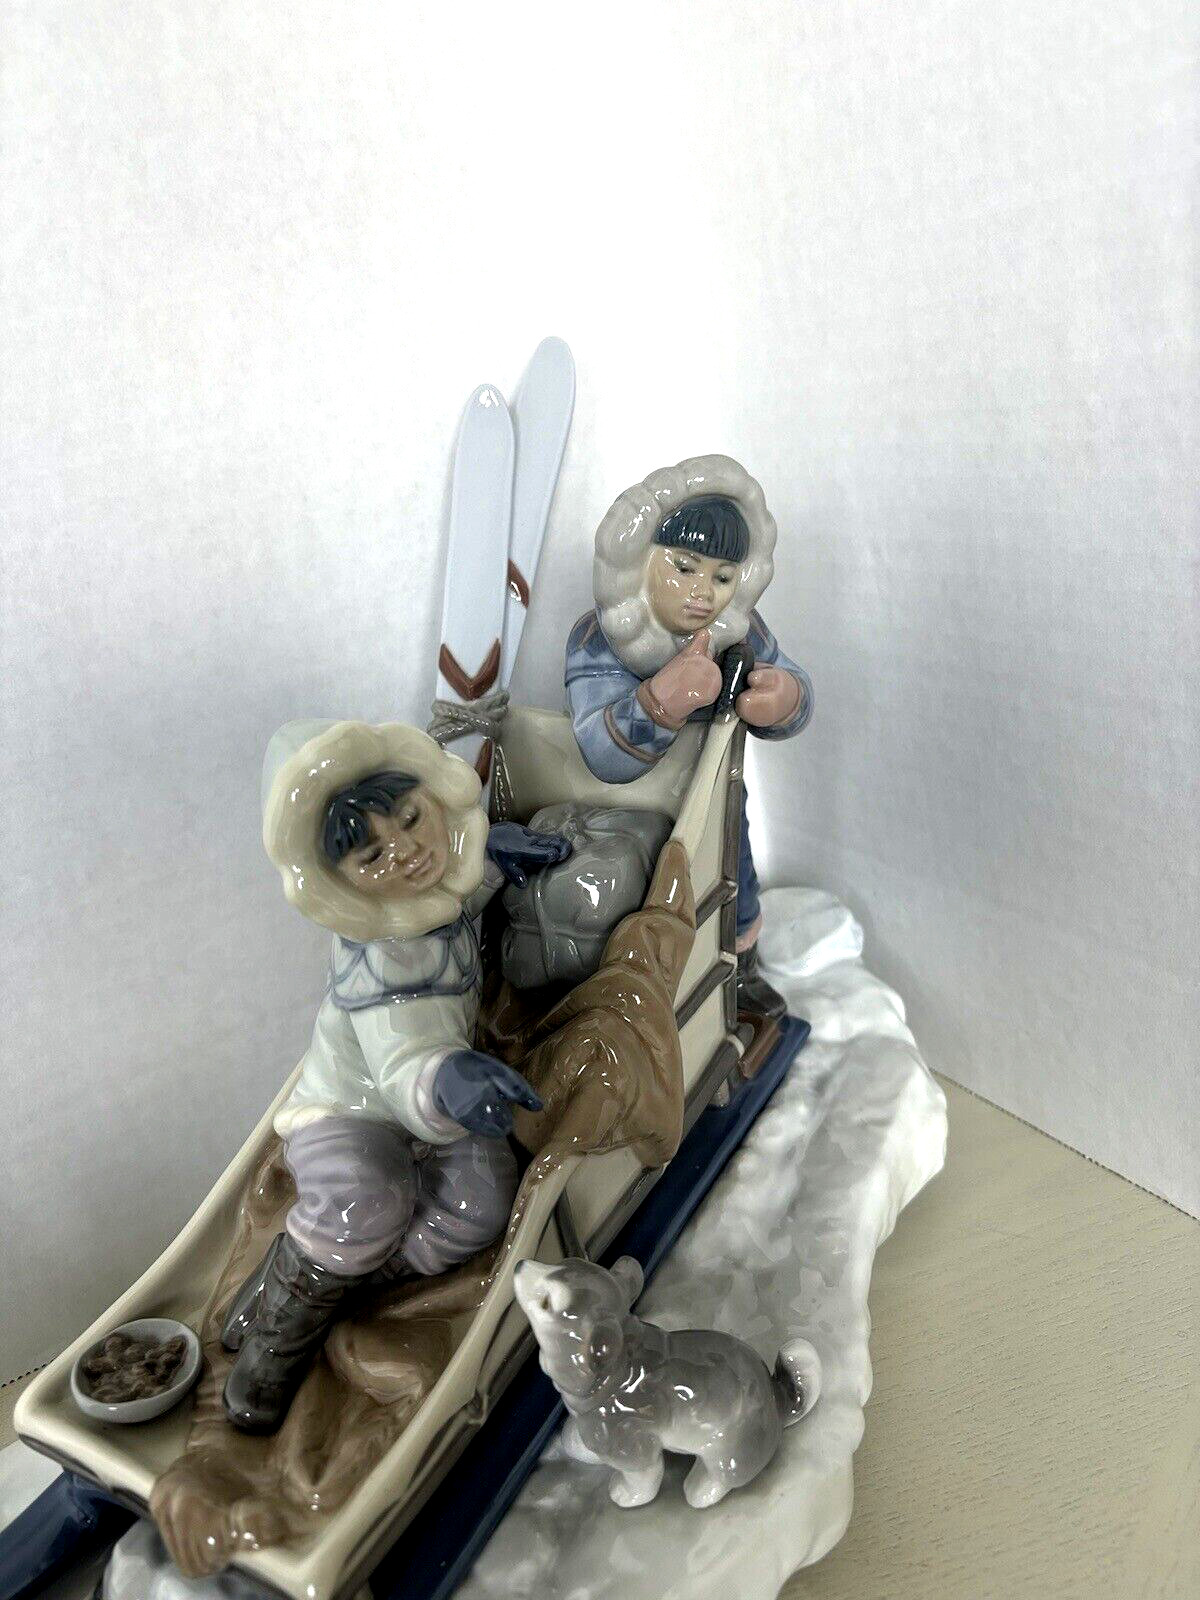 Lladro 1991 “Onward” Figurine RARE Limited Edition #1742 Signed No:204 of 1000